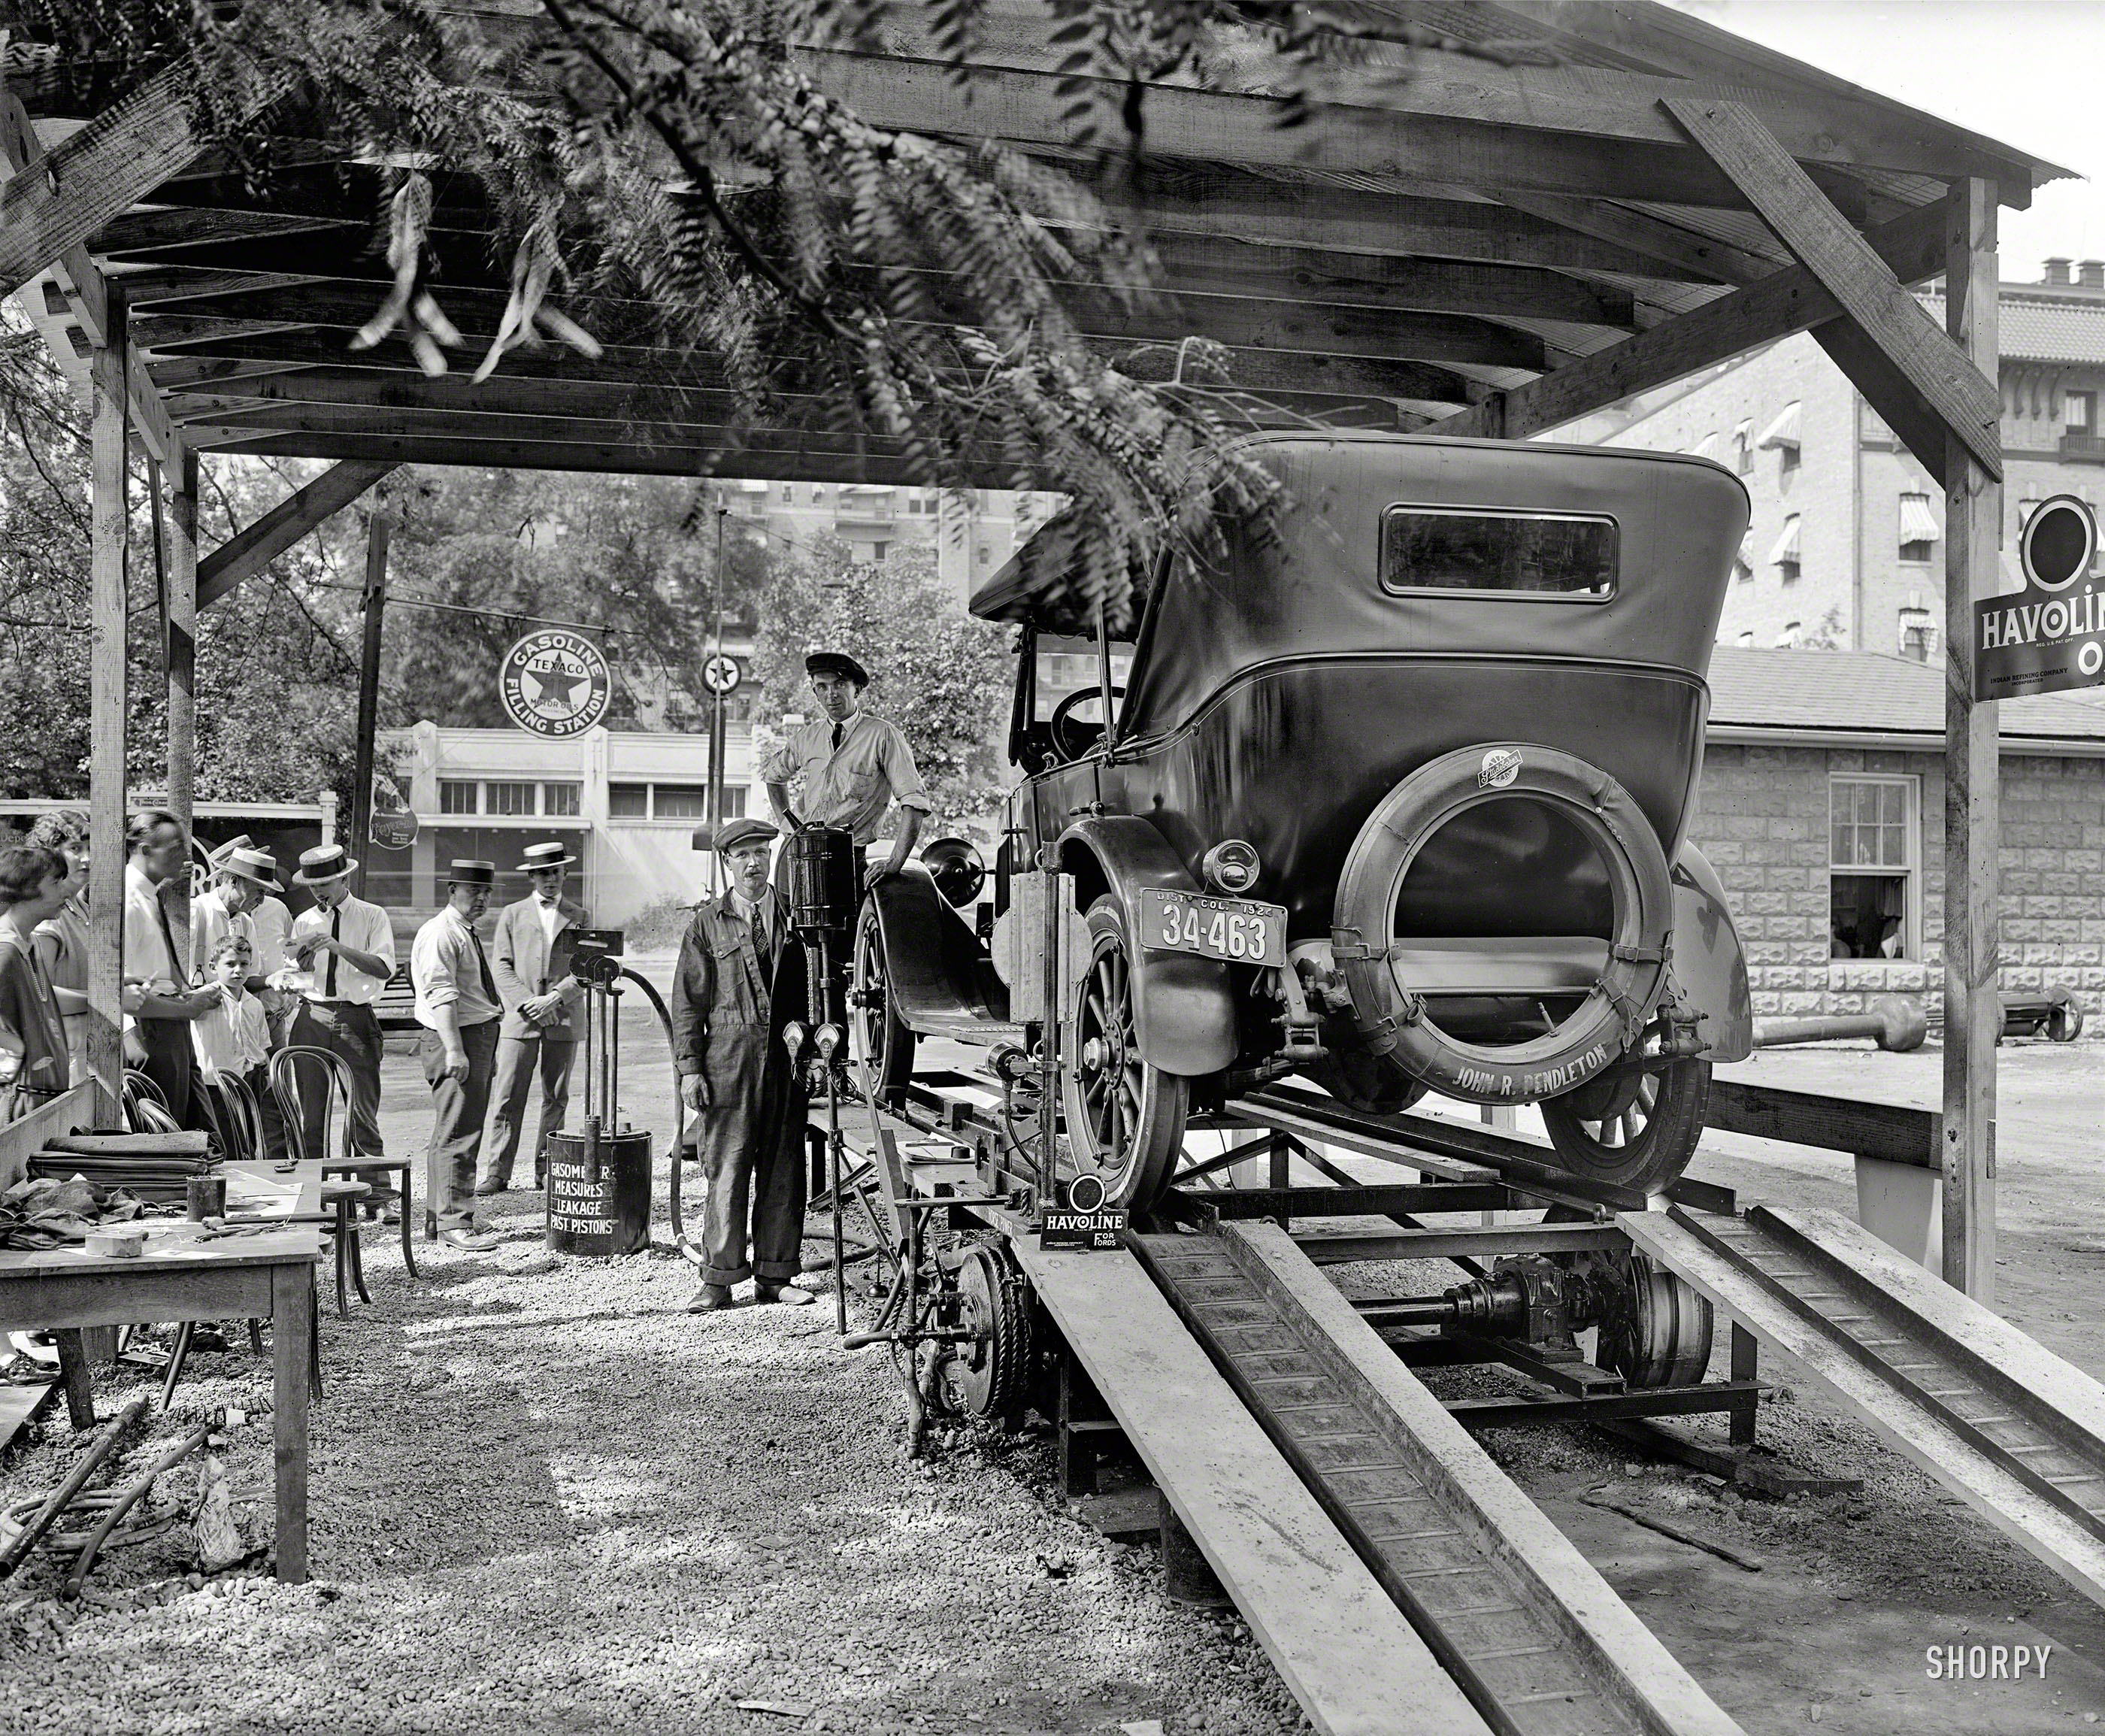 Washington, D.C., 1924. "Havoline Oil Co." Participants in the "Wasson Motor Check" at the Texaco Station on the corner of Florida Avenue and 14th Street. National Photo Company Collection glass negative. View full size.